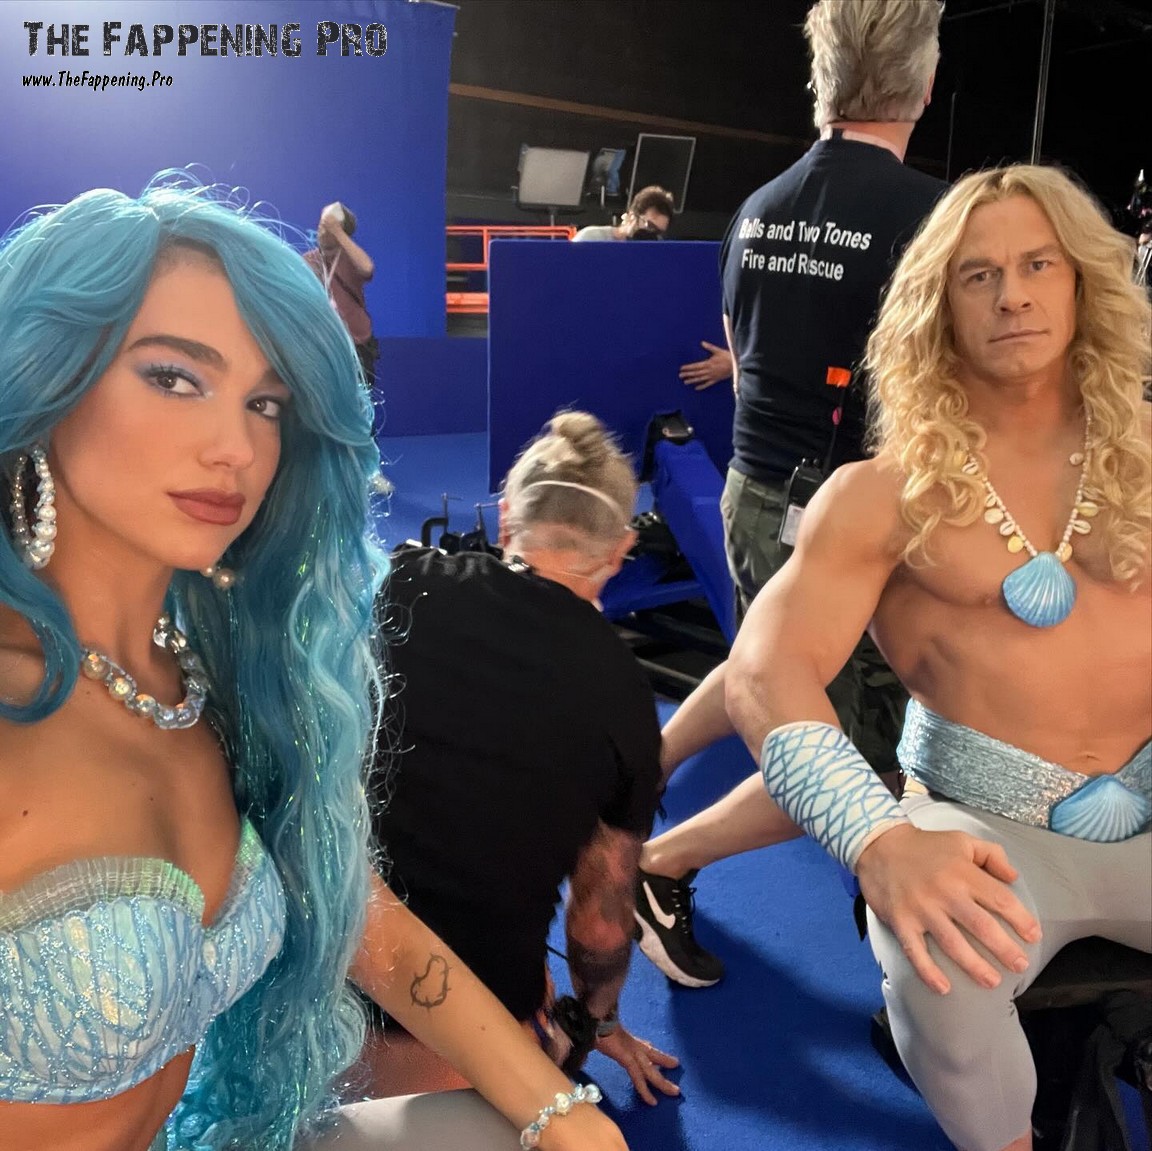 Get ready for an inside look at Dua Lipa's sizzling new music video, "Dance The Night"! The British singer wowed fans with her transformation into a sexy Barbie mermaid on set, showcasing her stunning figure in a revealing bra. With behind-the-scenes footage giving a glimpse of the action, anticipation is high for what promises to be a scintillating and seductive visual feast from the talented star. Stay tuned for more updates on the upcoming release!